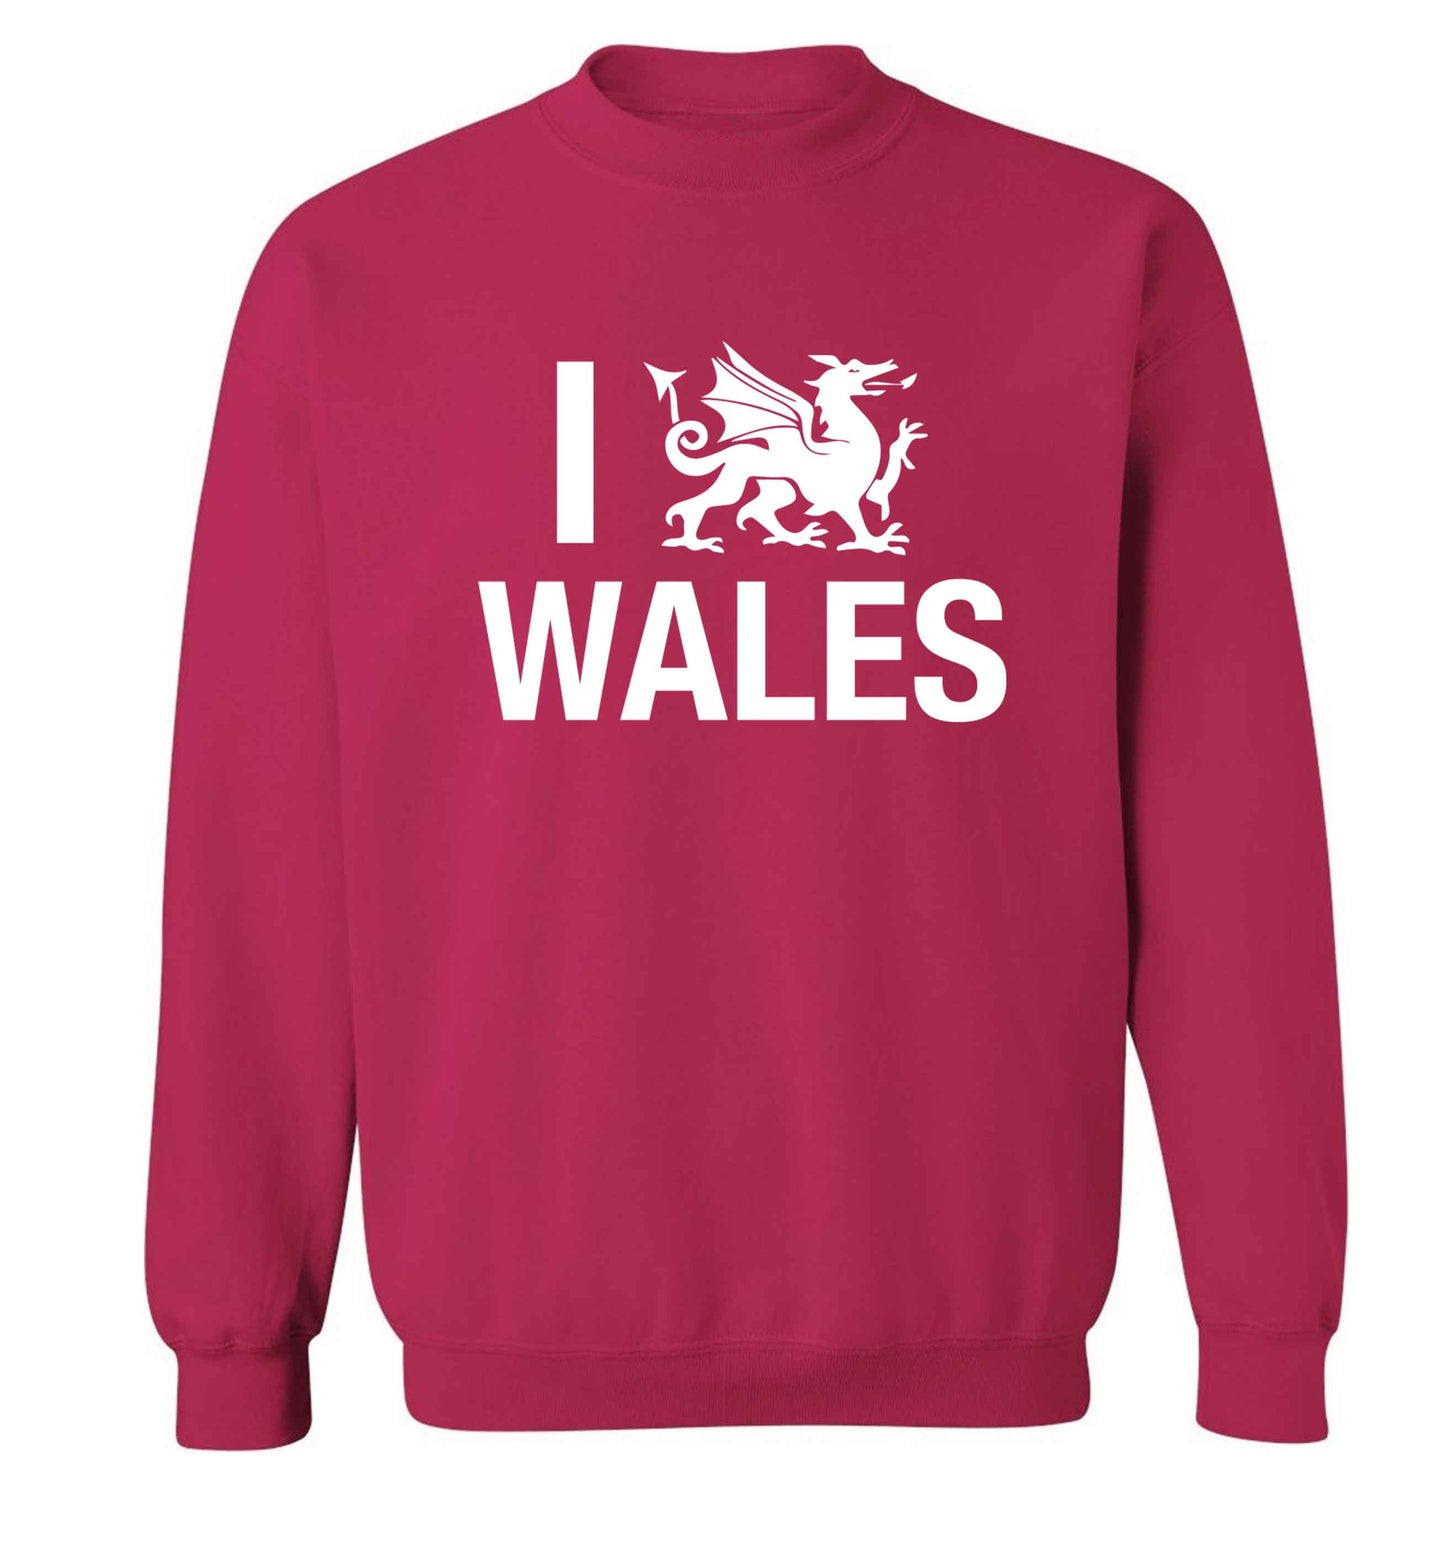 I love Wales Adult's unisex pink Sweater 2XL